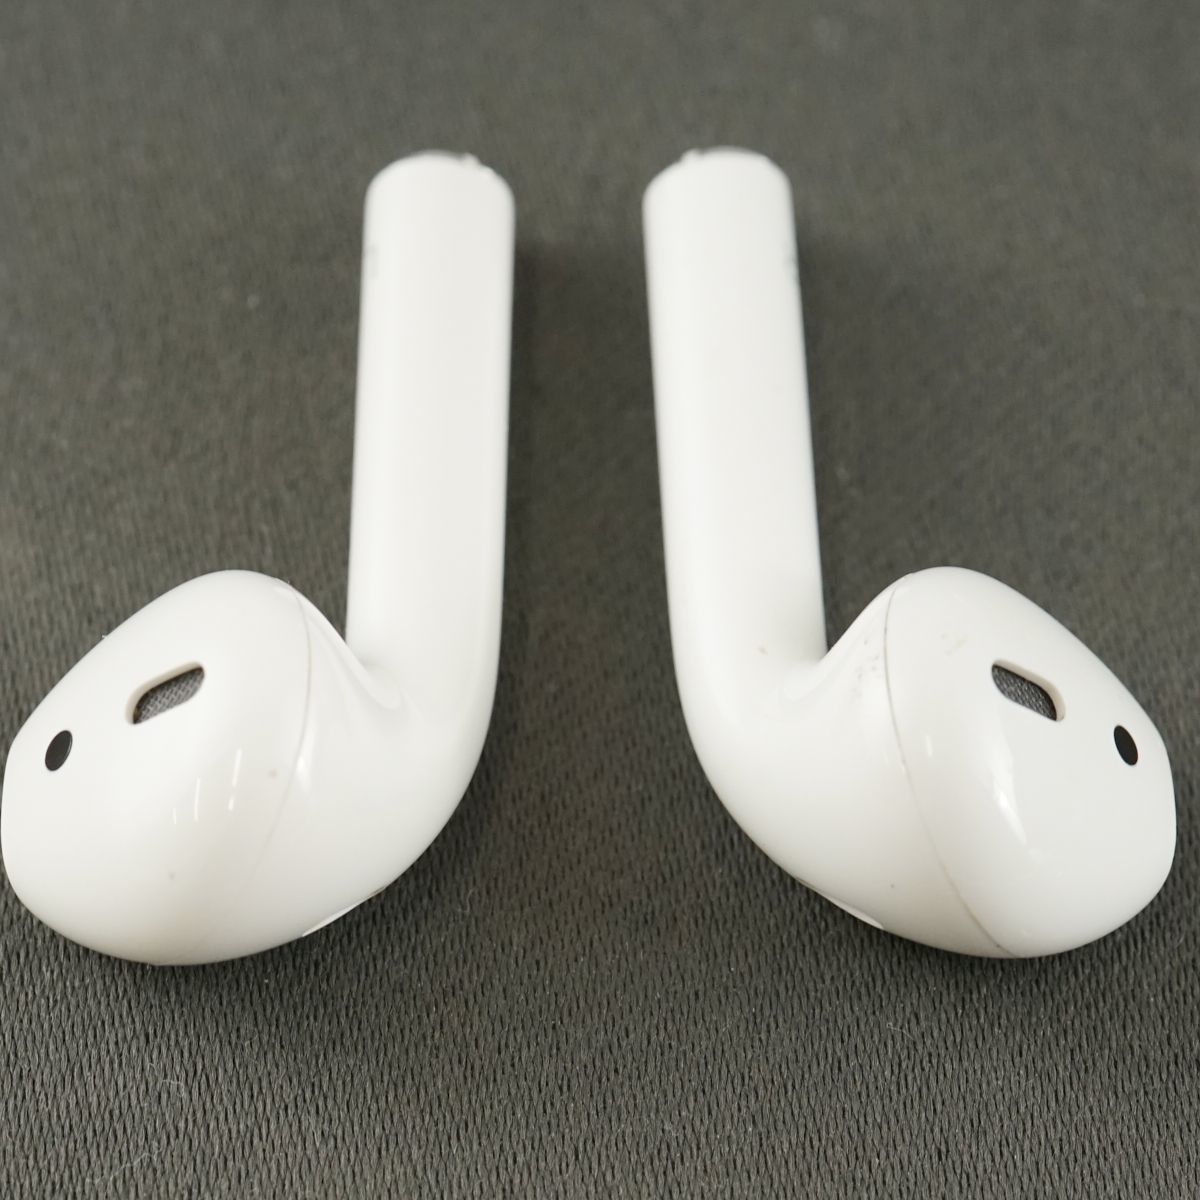 Apple AirPods with Charging Case エアーポッズ ワイヤレスイヤホン USED品 第二世代 Bluetooth MV7N2J/A 完動品 即日発送 T V8018_画像6